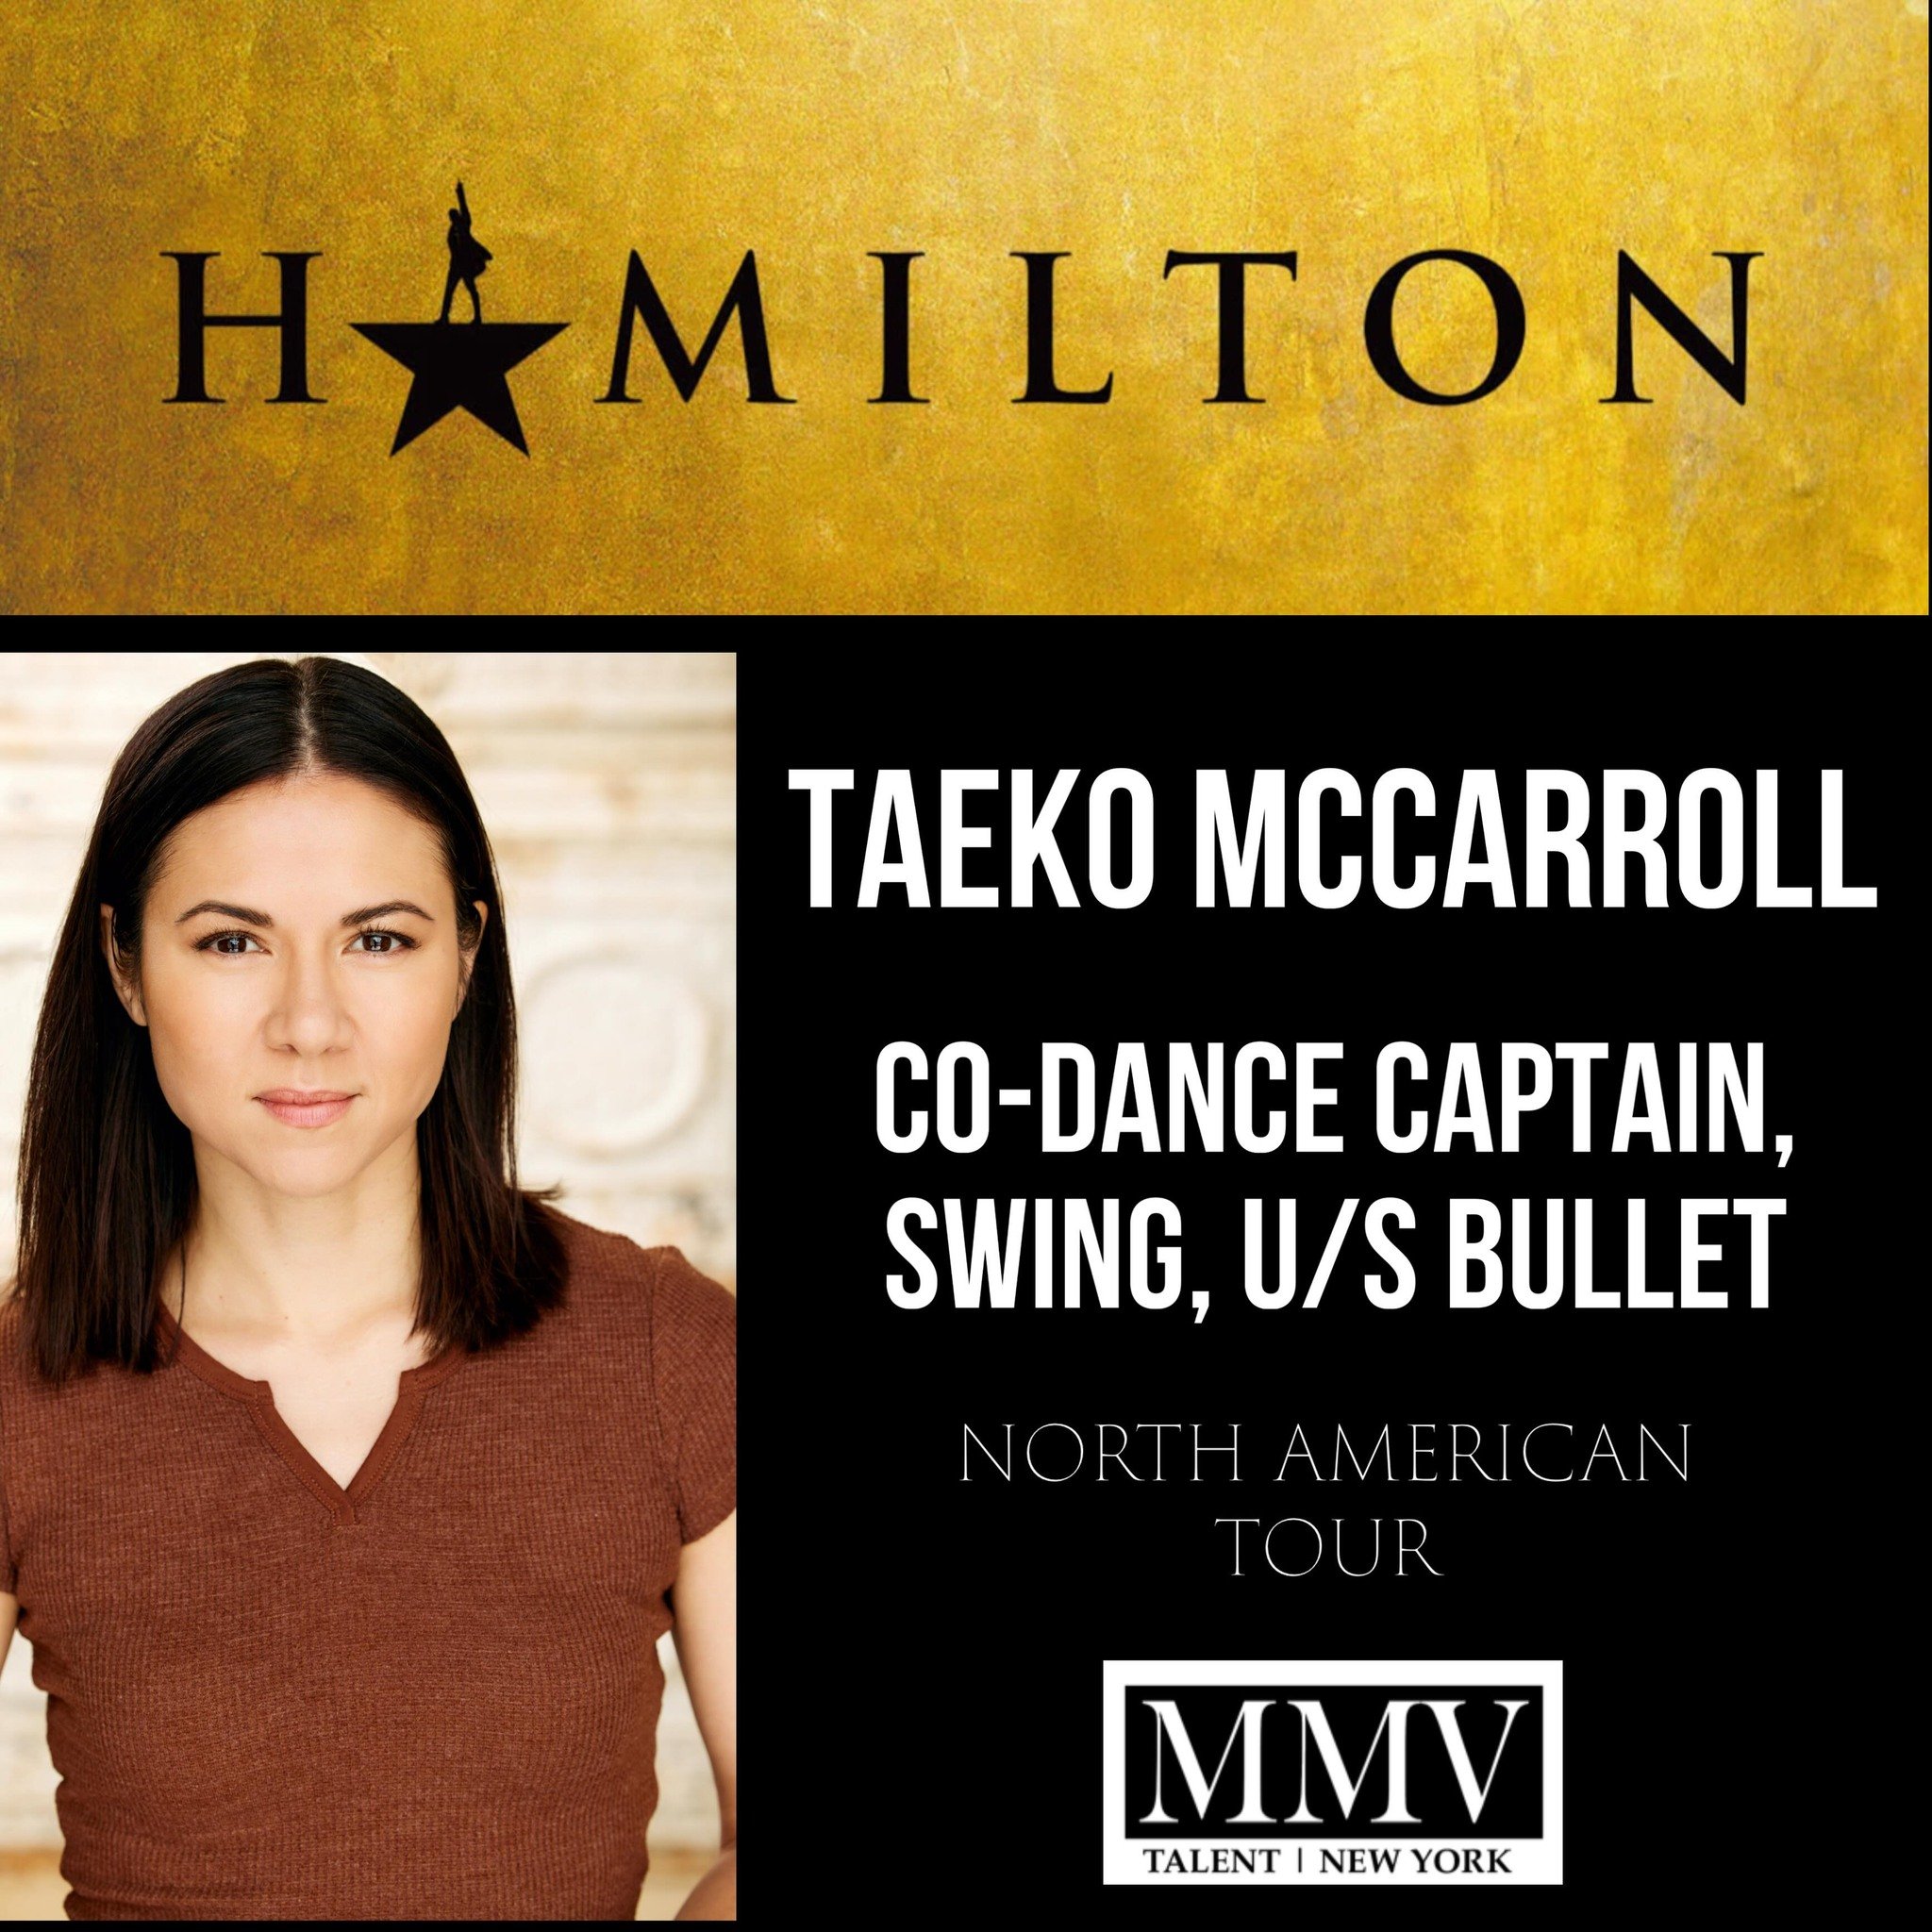 Taeko McCarroll is taking on a new role or we should say roles in Hamilton on Tour. Congratulations!!! 🤩
@taekomccarroll 

#mmvtalent